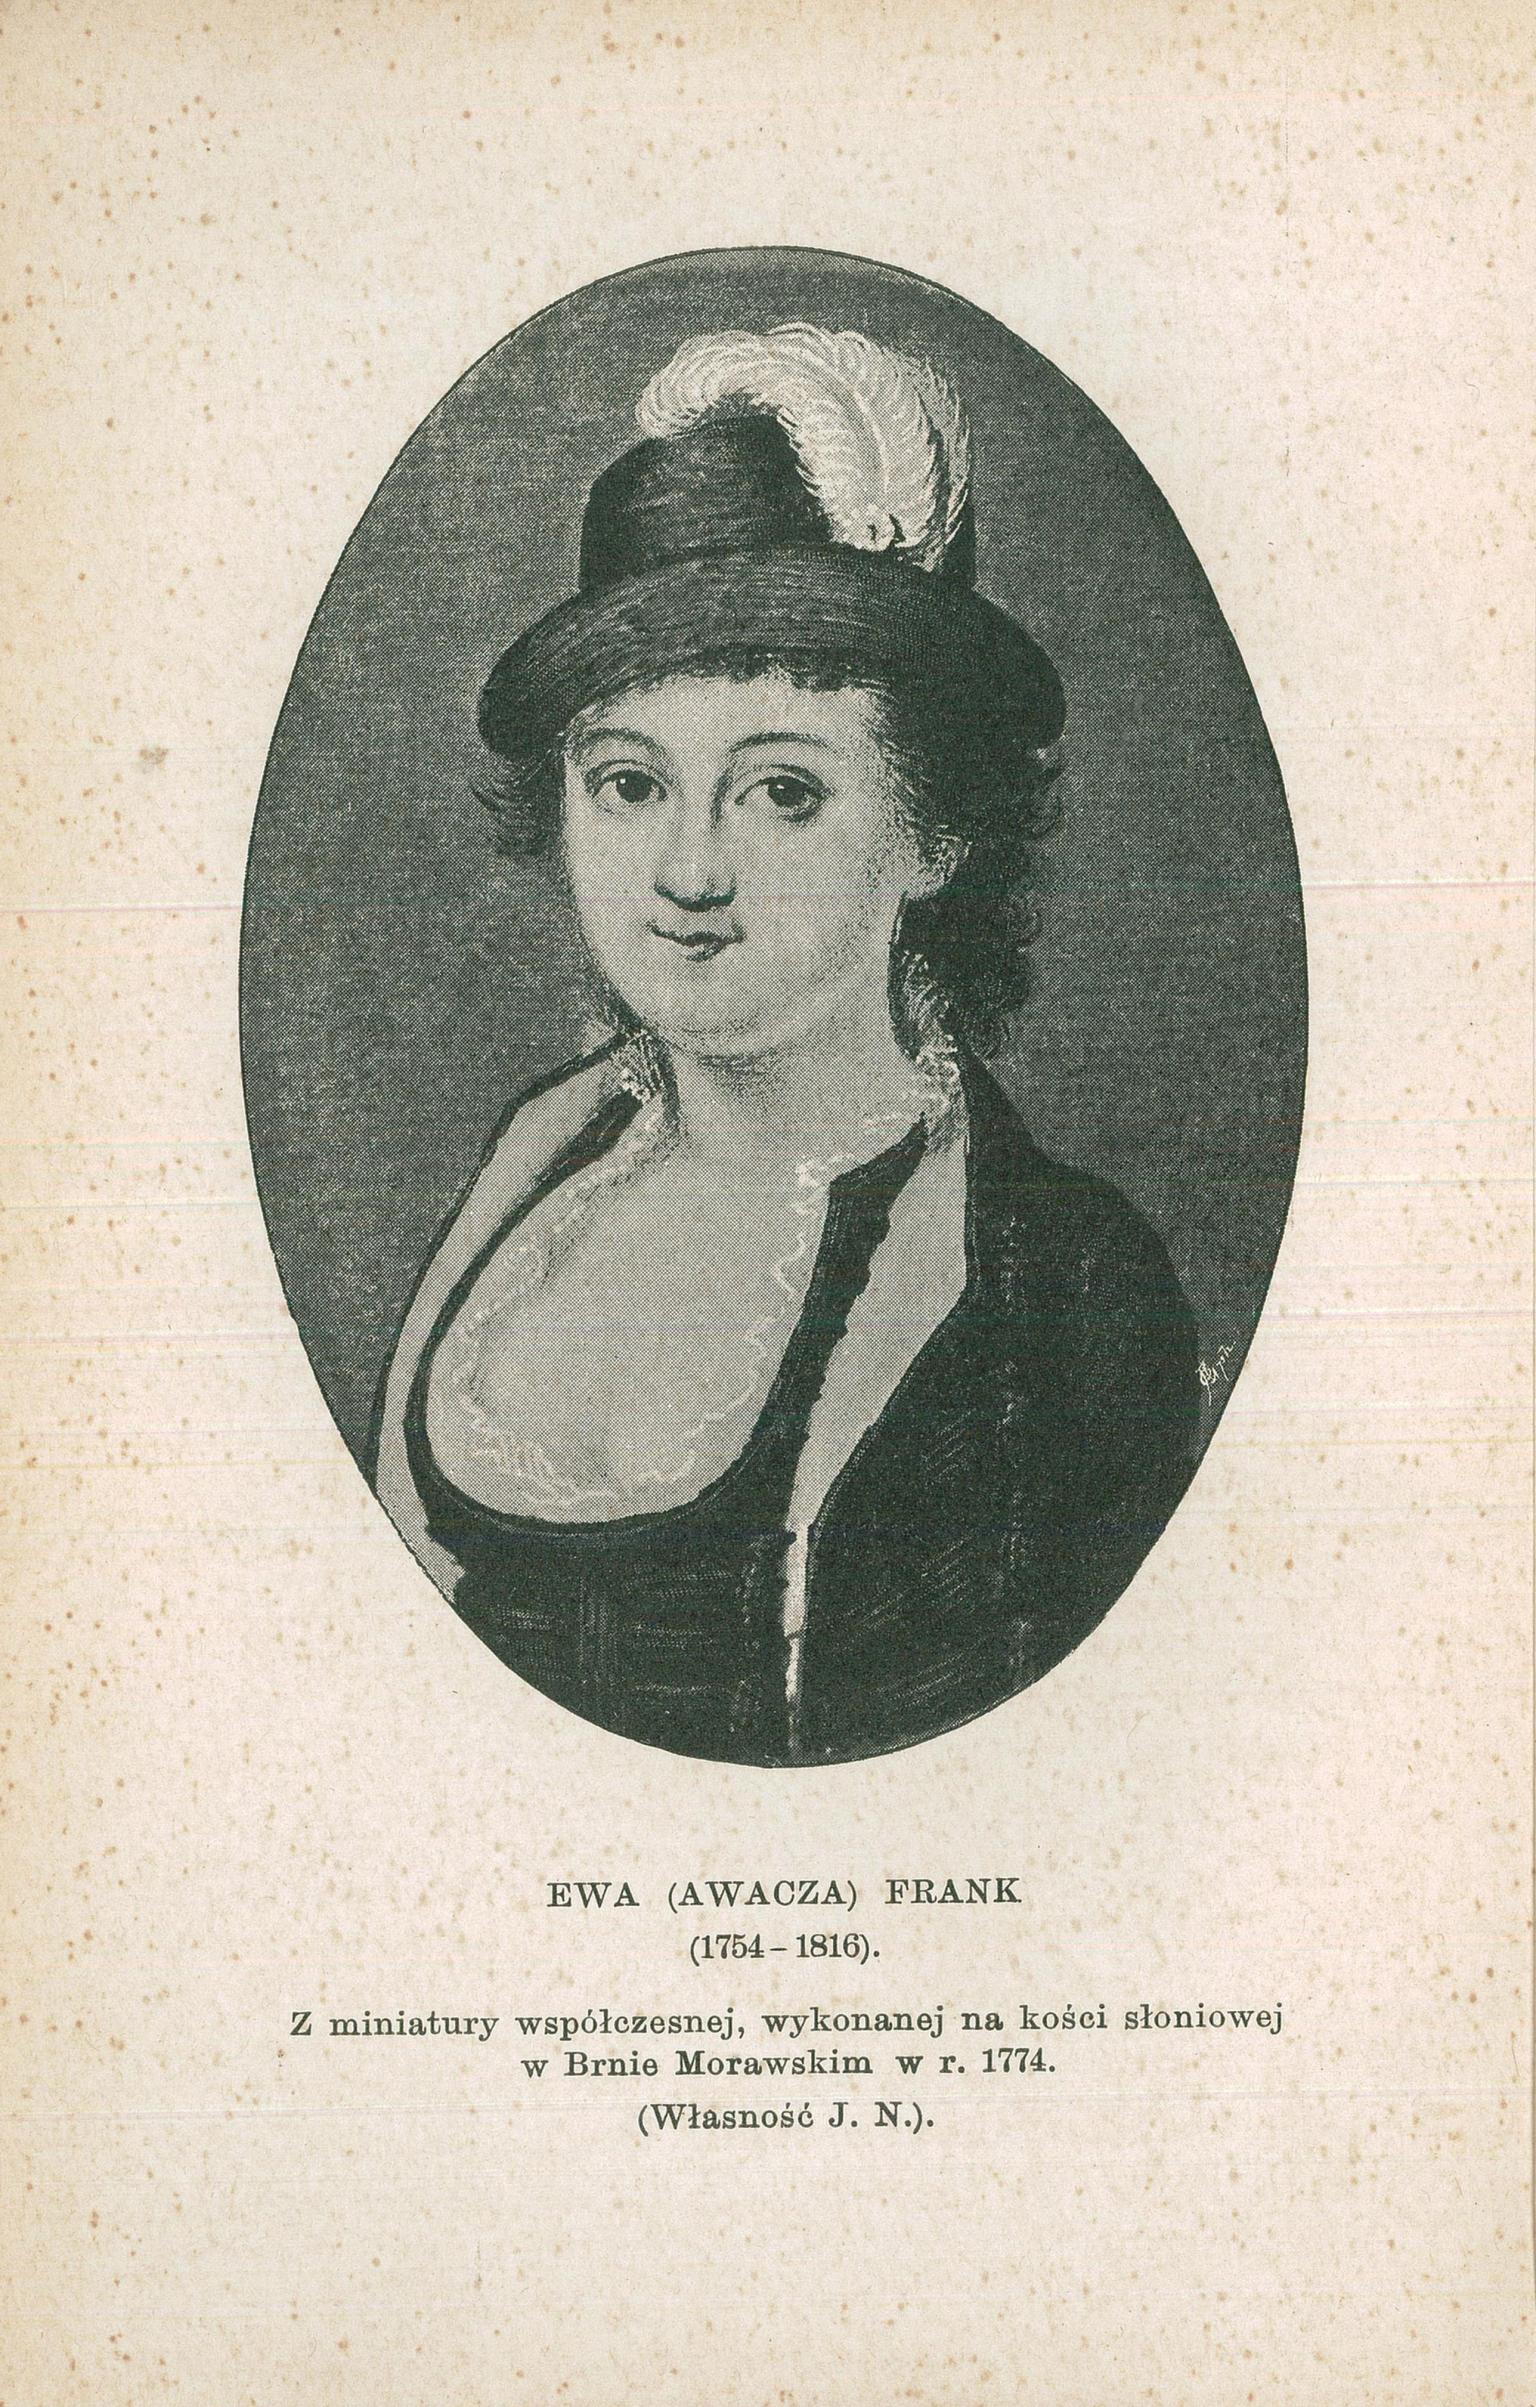 Print of half-length portrait of woman in hat and dress with lace border, and Polish text underneath. 